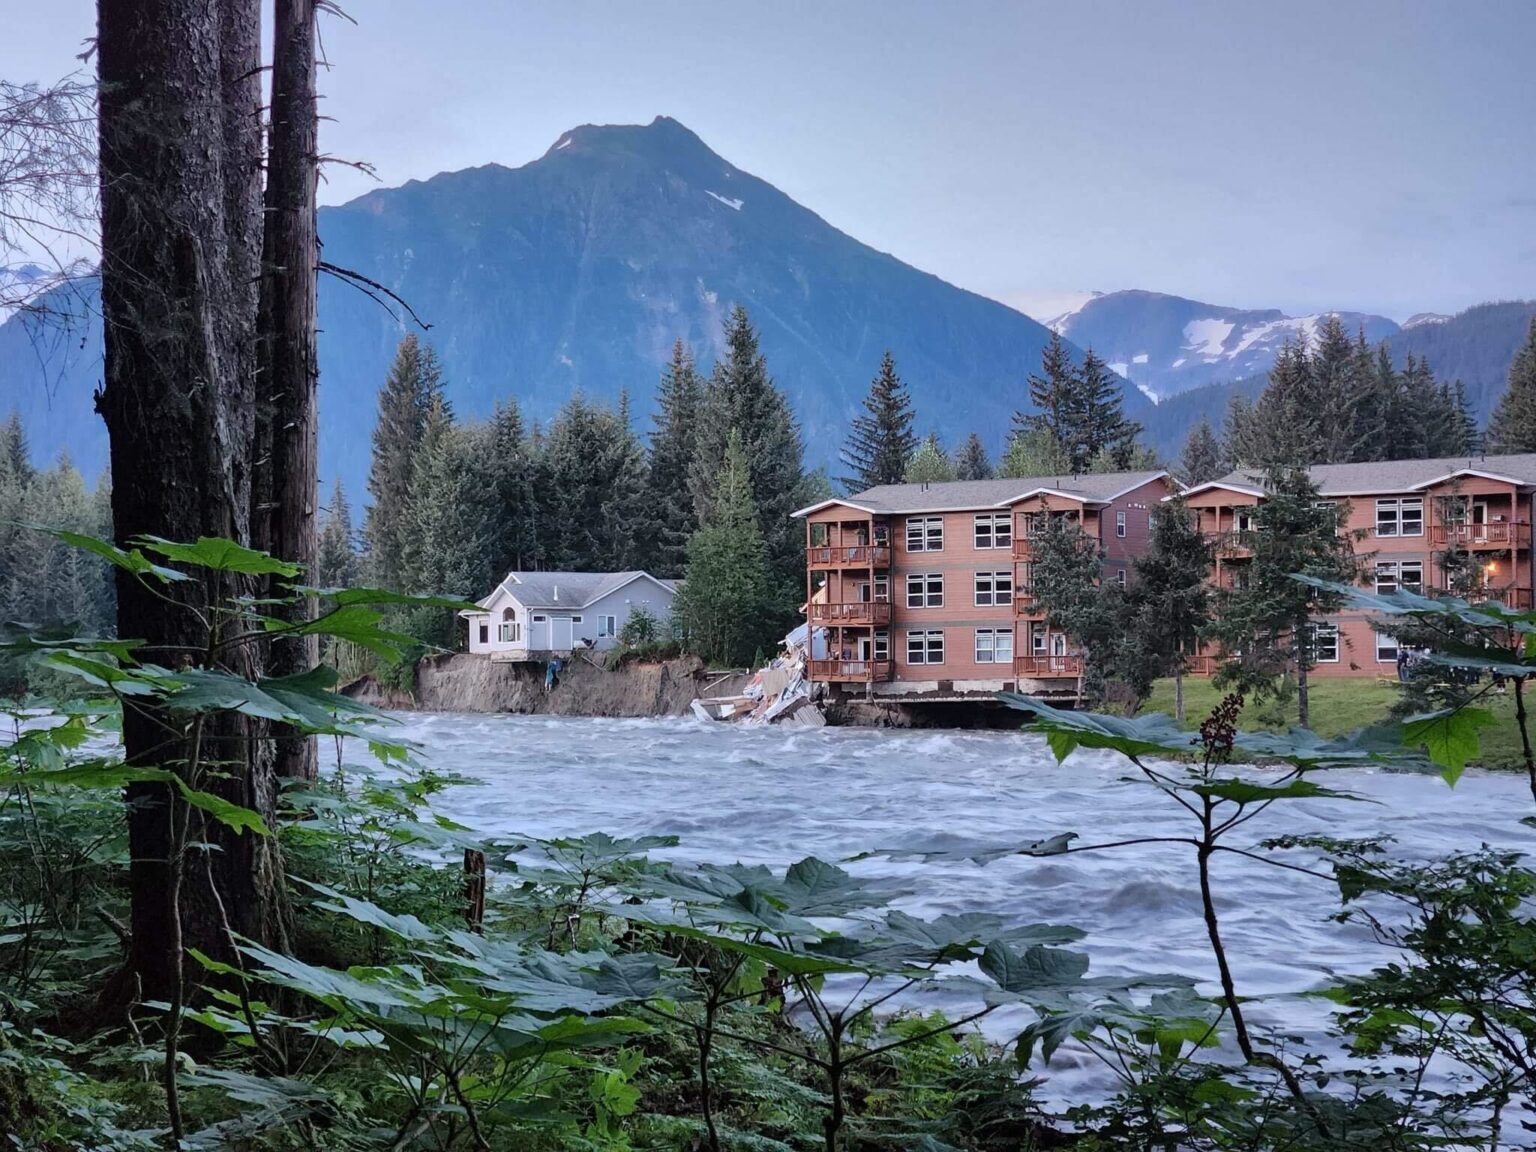 At least one home along Riverside Drive collapsed after severe glacial outburst flooding in Mendenhall River eroded the bank